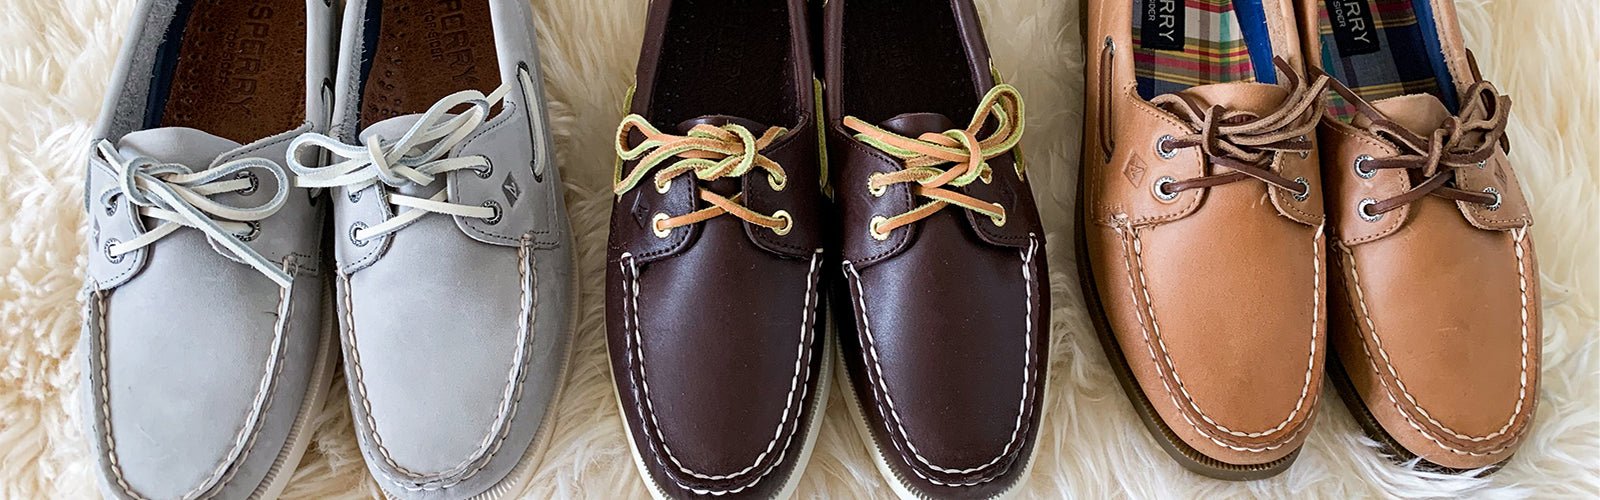 Sperry - 4elementsclothing